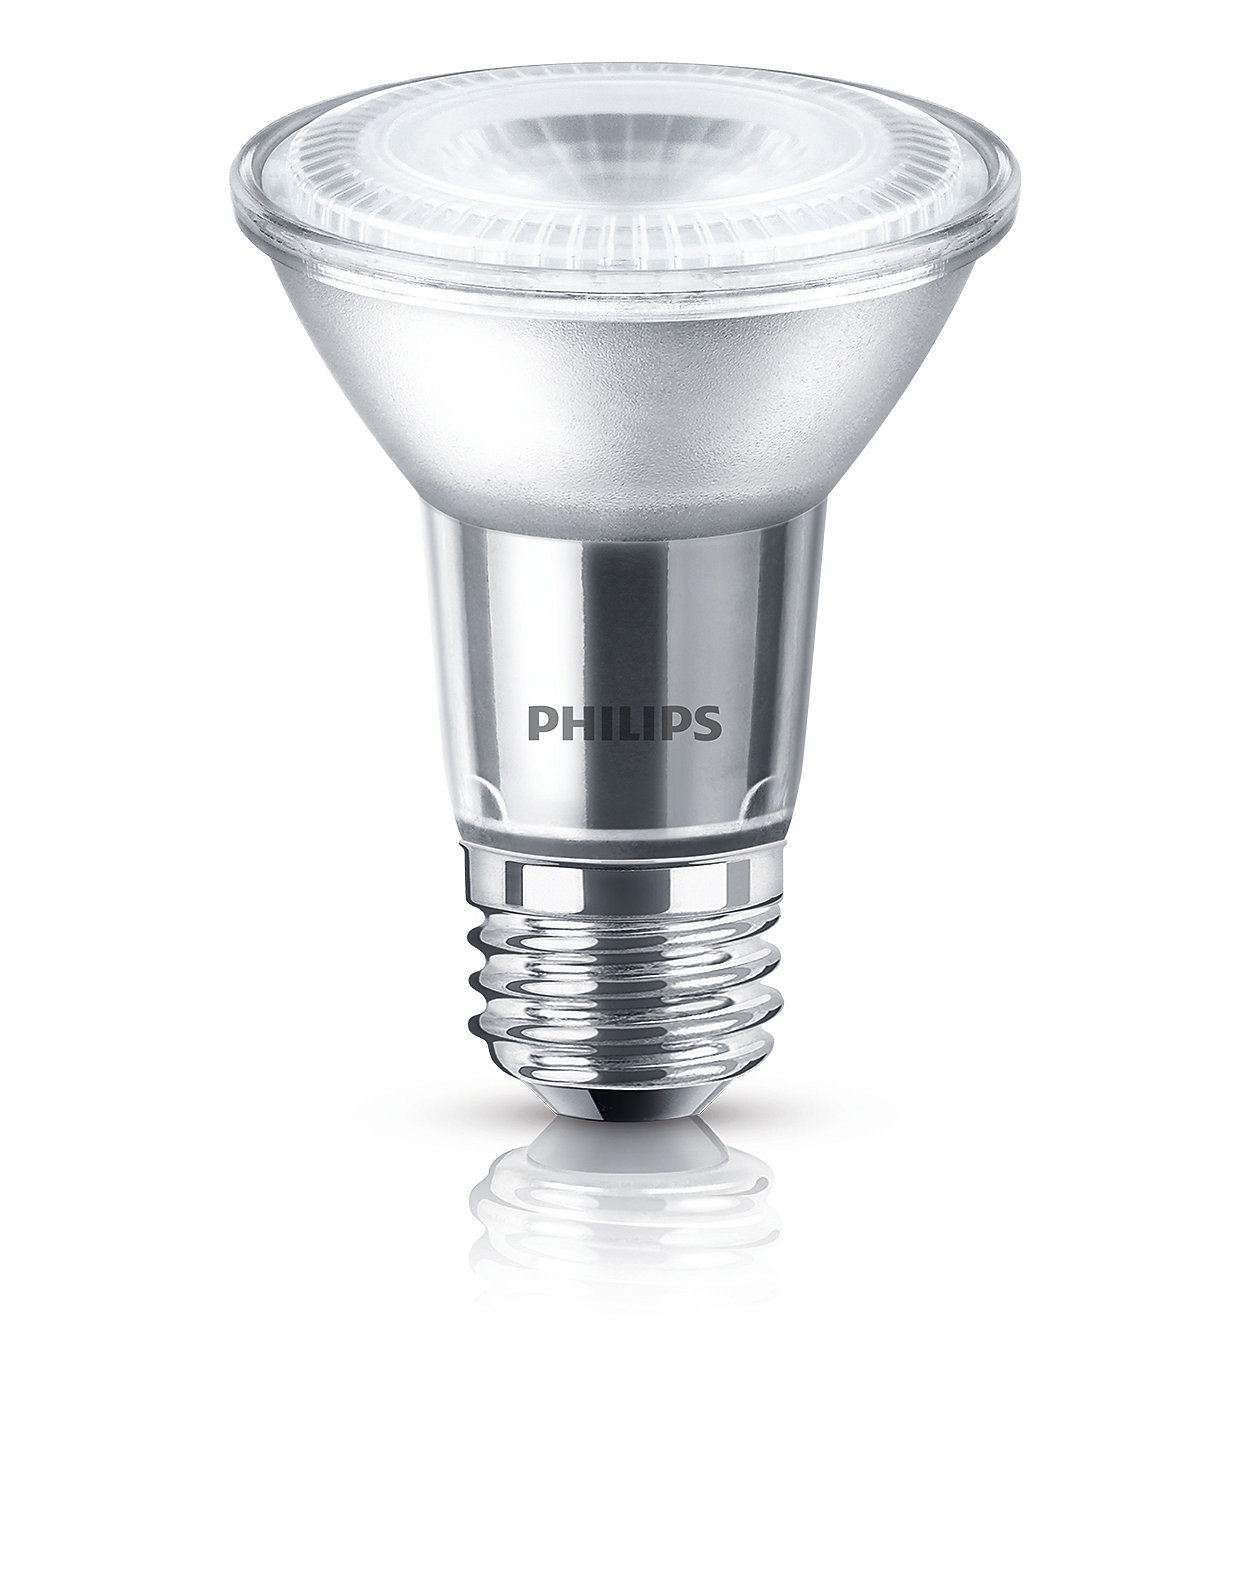 Dimmable LED light with a focused bright beam